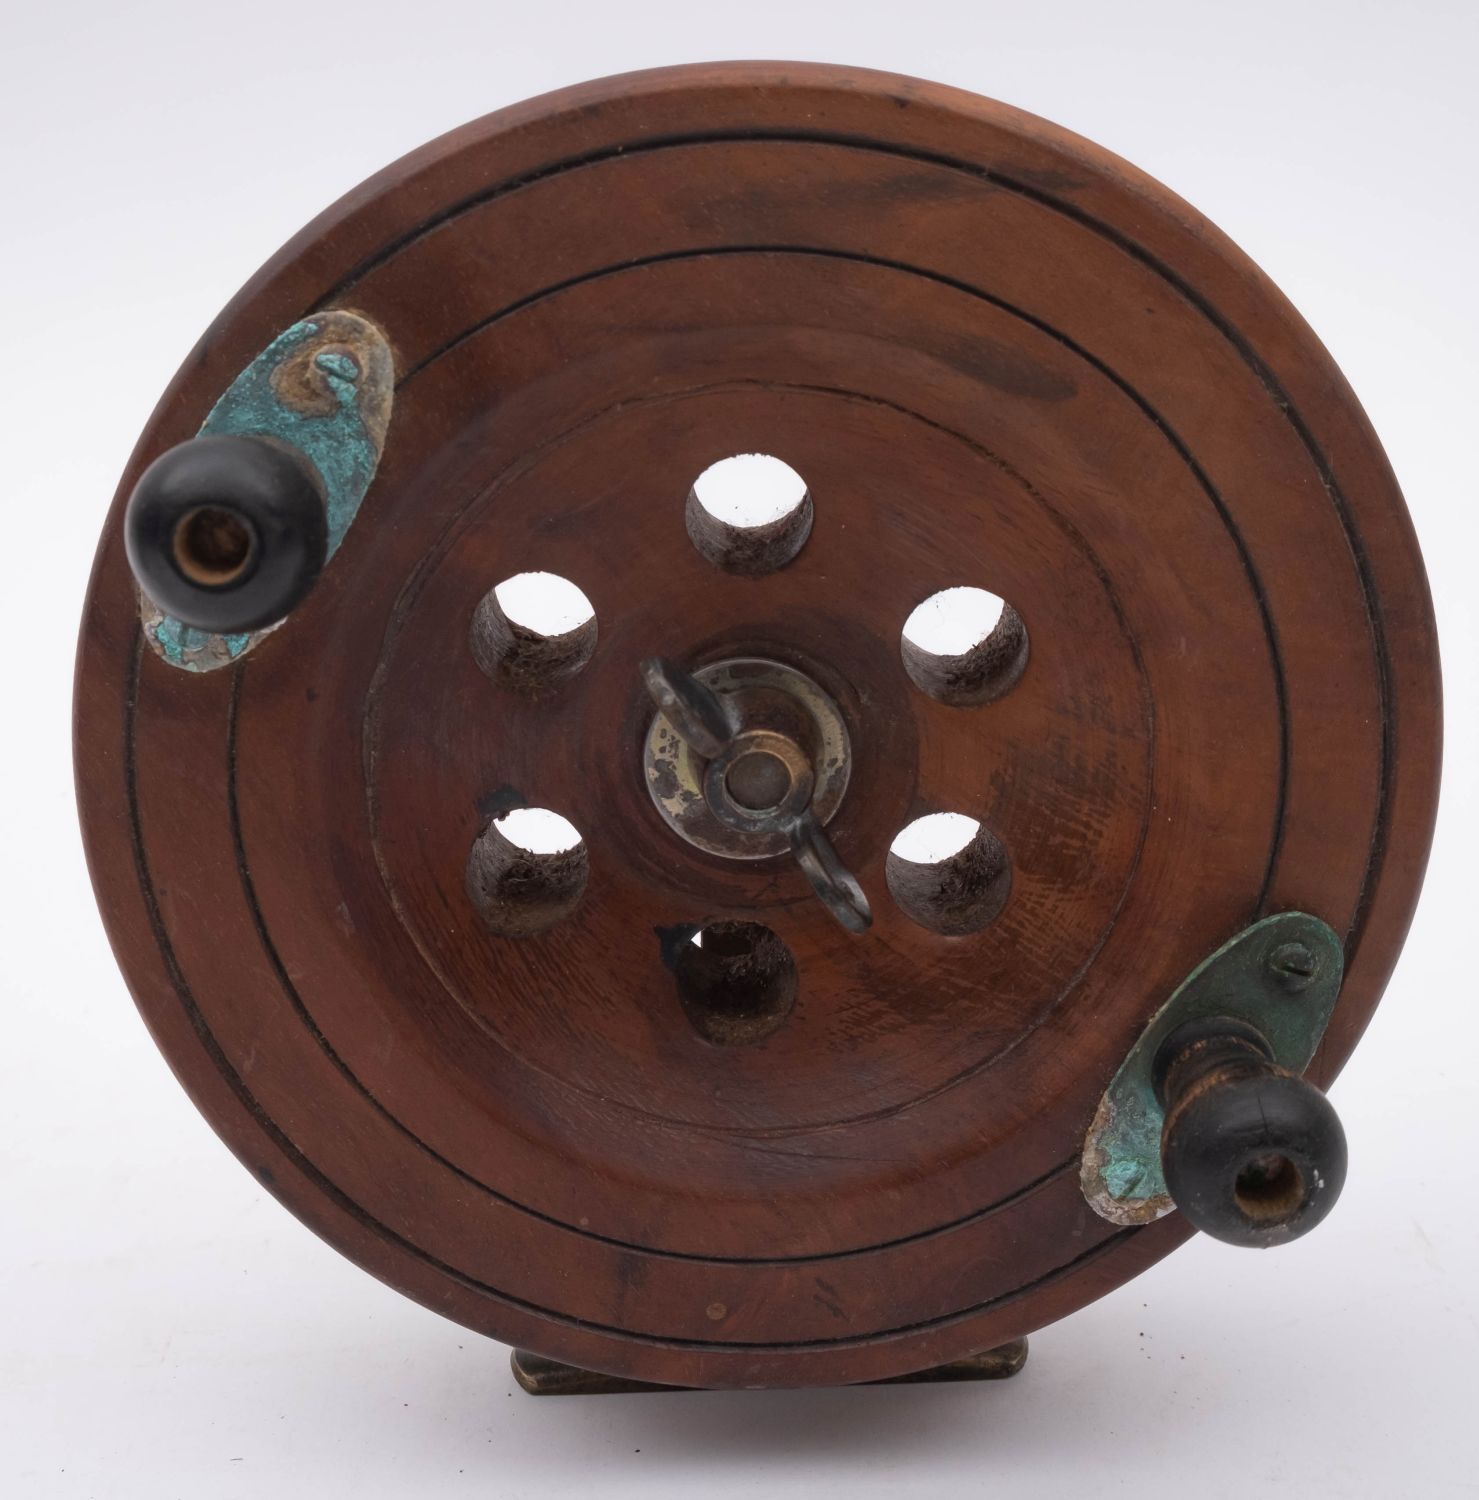 A late 19th century mahogany and brass star back reel, with double horn handles, - Image 3 of 6